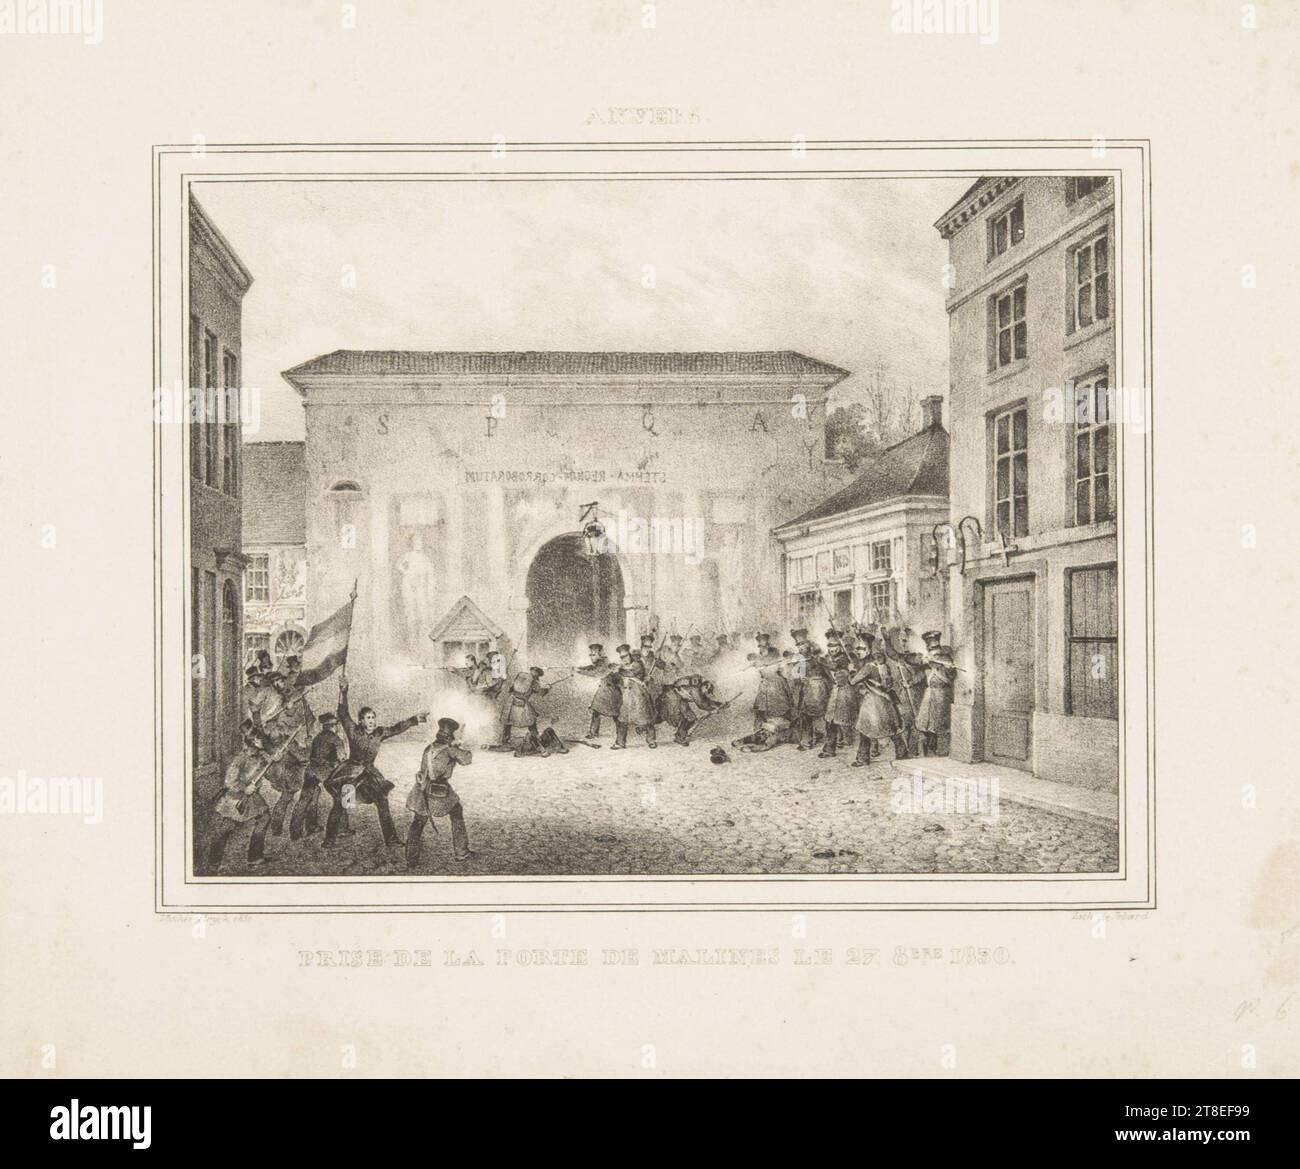 Fight between the Belgian insurgents and the Dutch at the Mechelse Poort at Antwerp, 1830. Antwerp. Belgian independence. ANTWERP. Vanhemelryck 1830. TAKEOVER OF THE GATE OF MALINES ON 27 October 1830. Lith. by Jobard Stock Photo